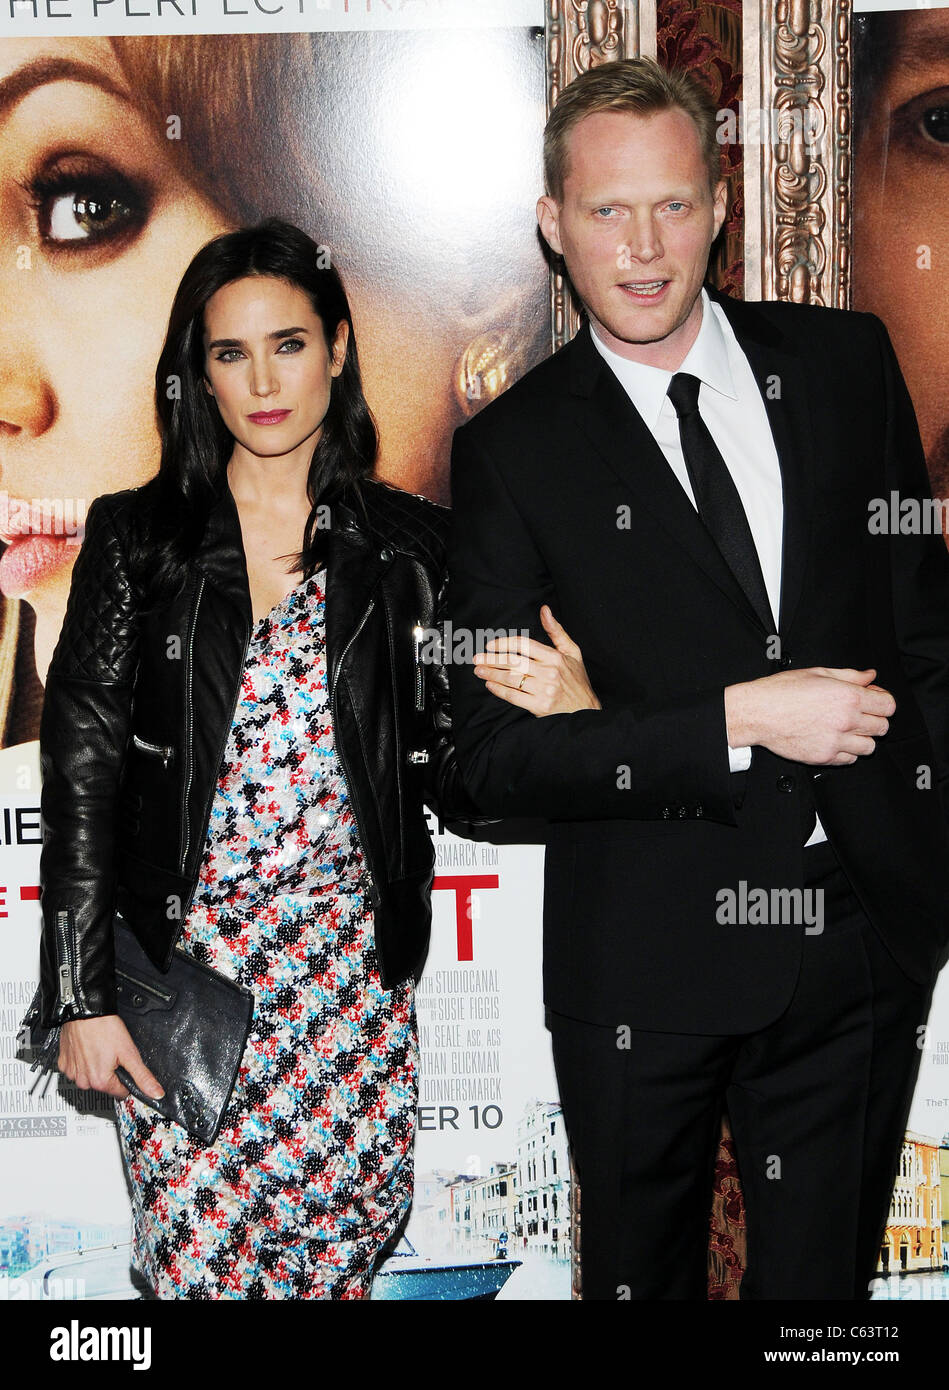 Jennifer Connelly and Paul Bettany Editorial Stock Photo - Image of star,  actress: 59588498